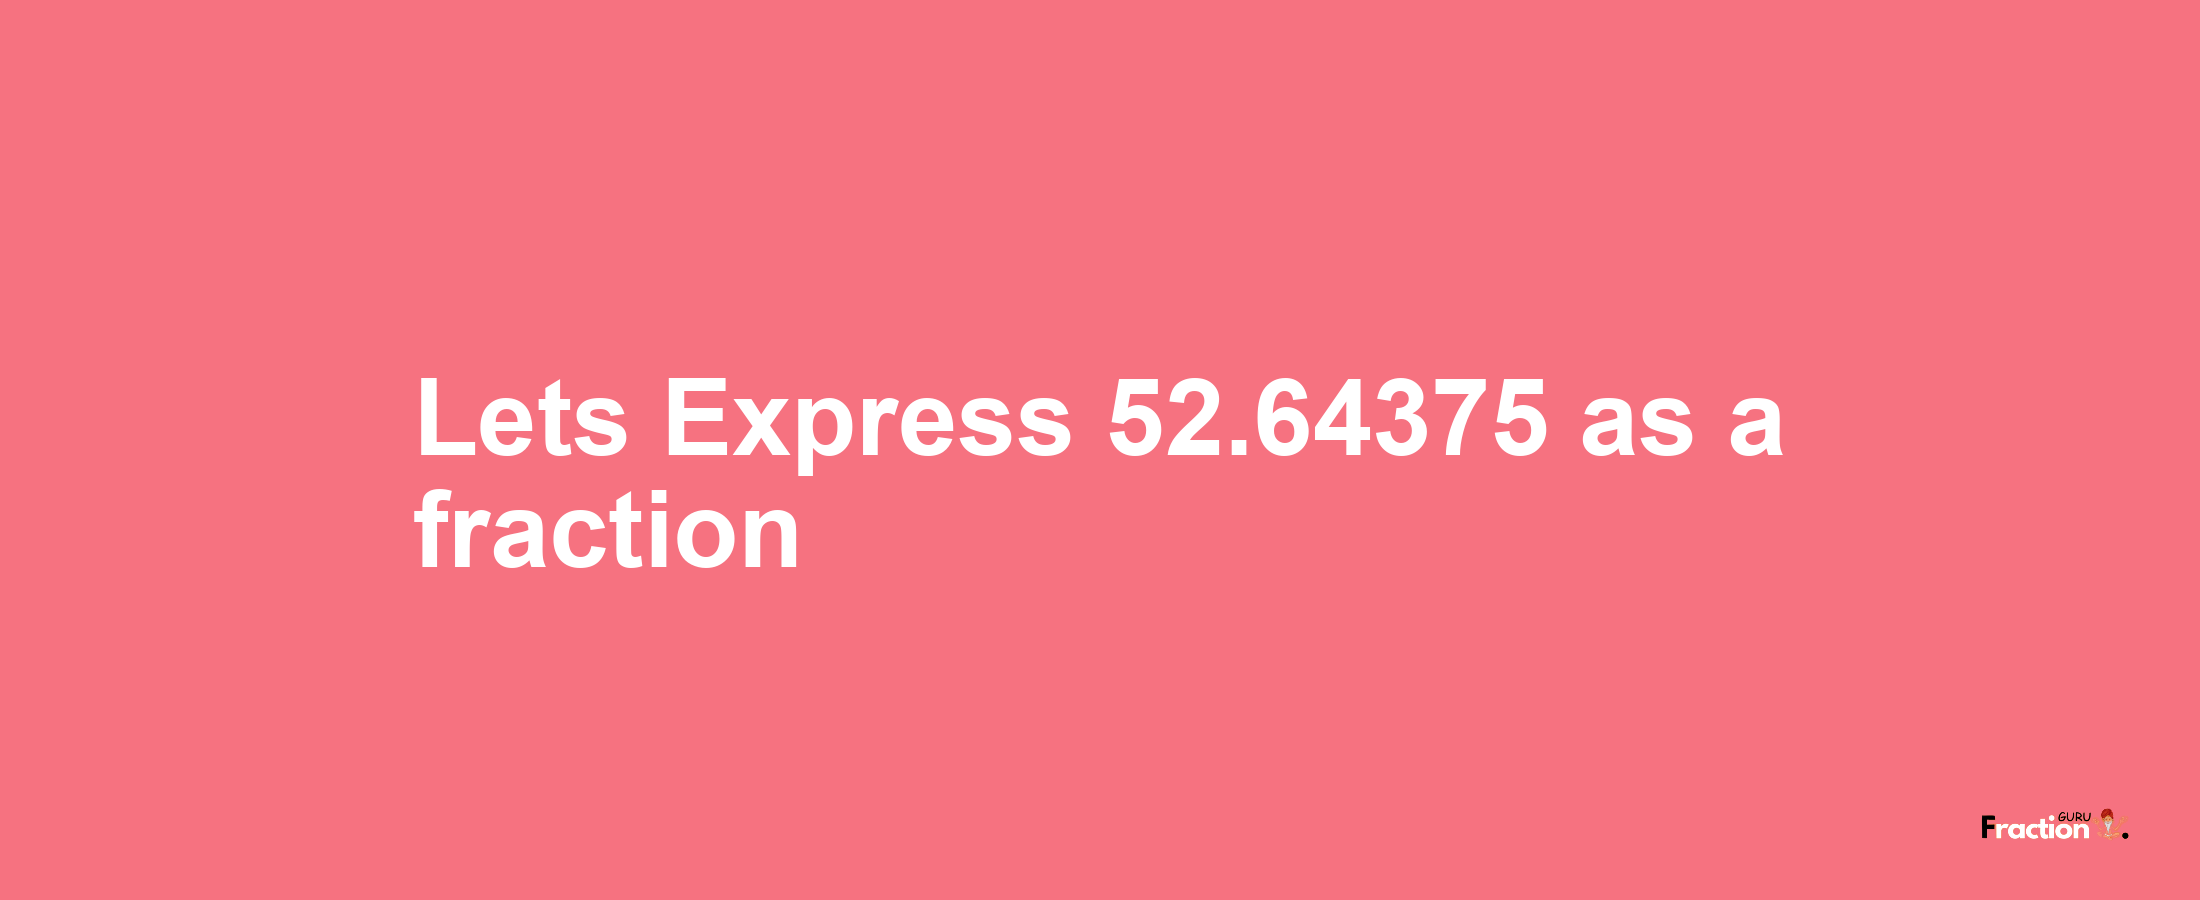 Lets Express 52.64375 as afraction